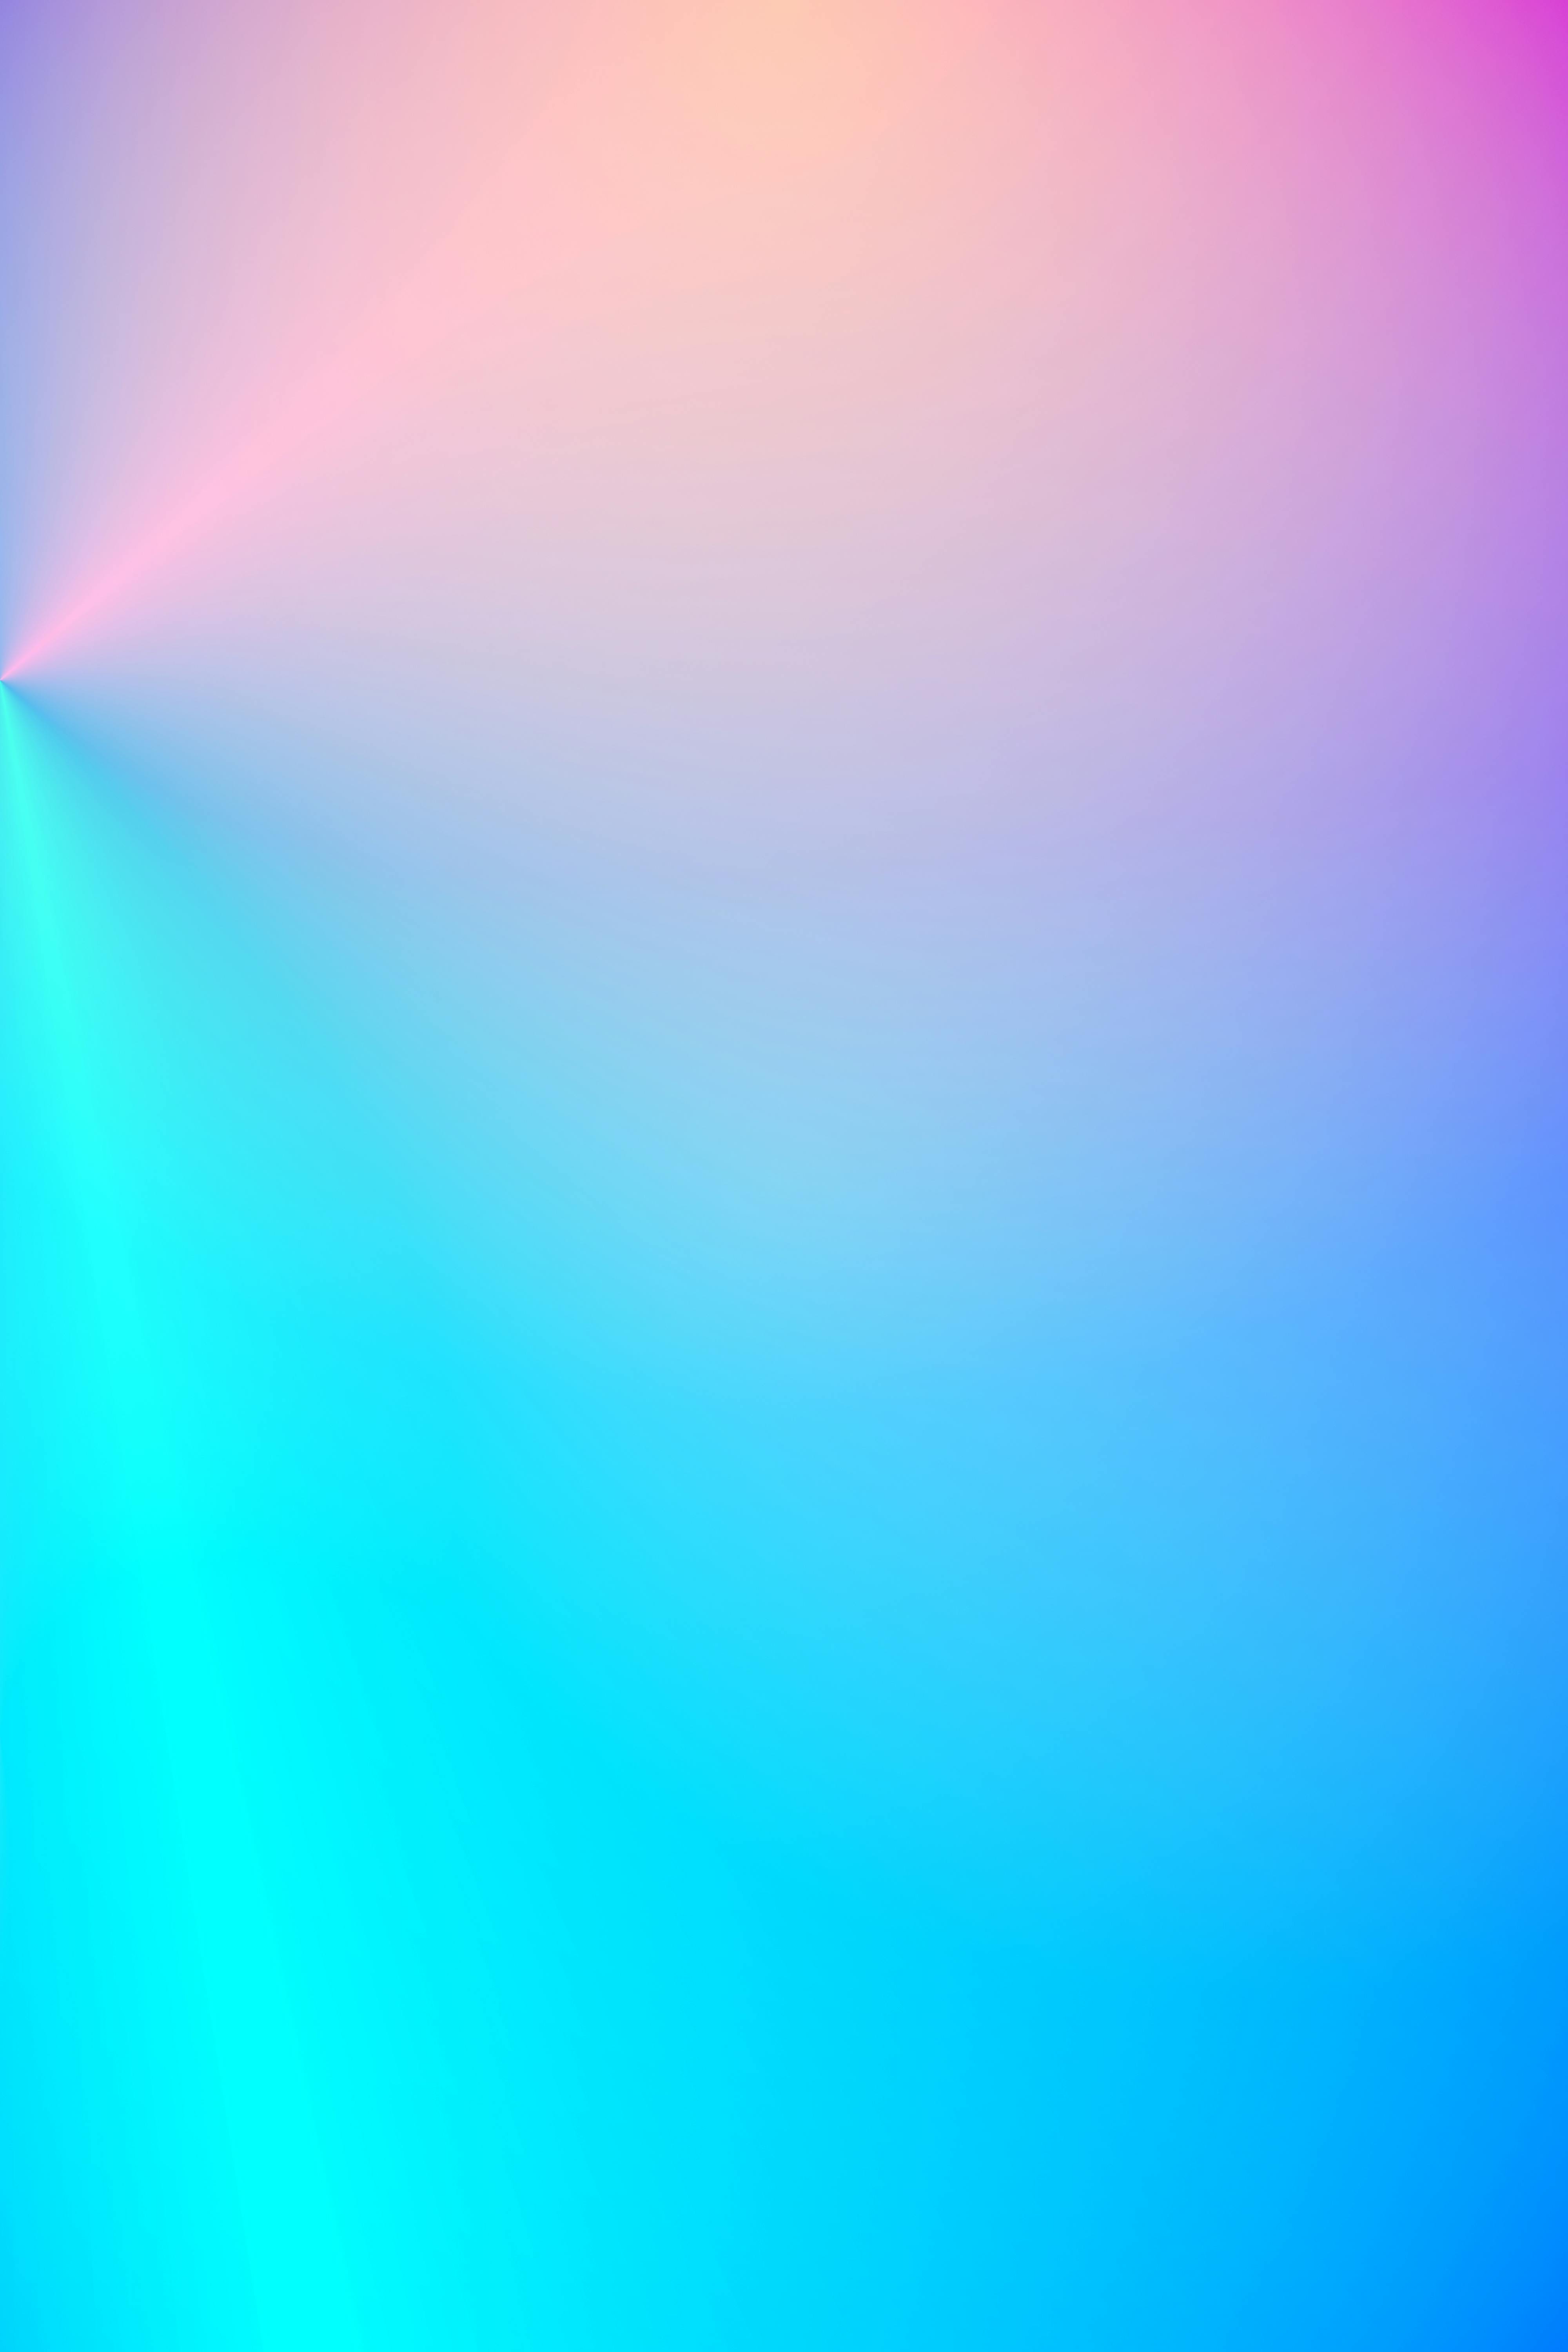 Bright colorful lights on abstract background · Free Stock Photo